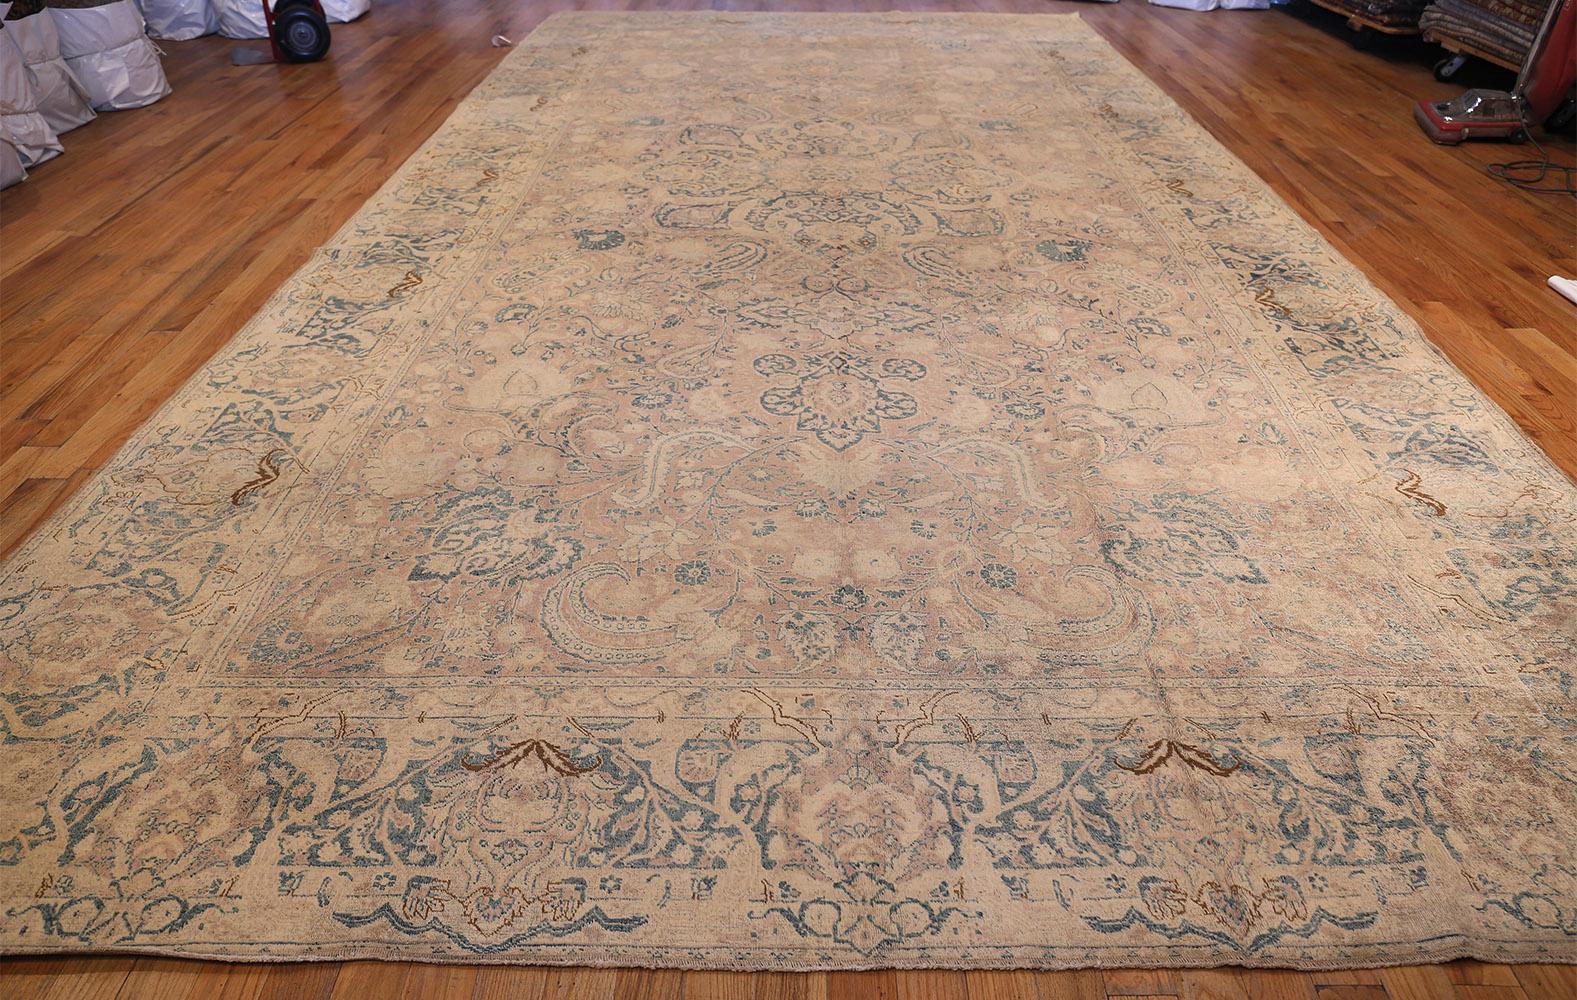 Beautiful large size antique and finely woven Persian Kerman rug, country of origin: Persia, circa date: late 19th century. Size: 10 ft x 19 ft (3.05 m x 5.79 m) 

A large medallion fills the middle of this antique Persian rug, crafted with equal